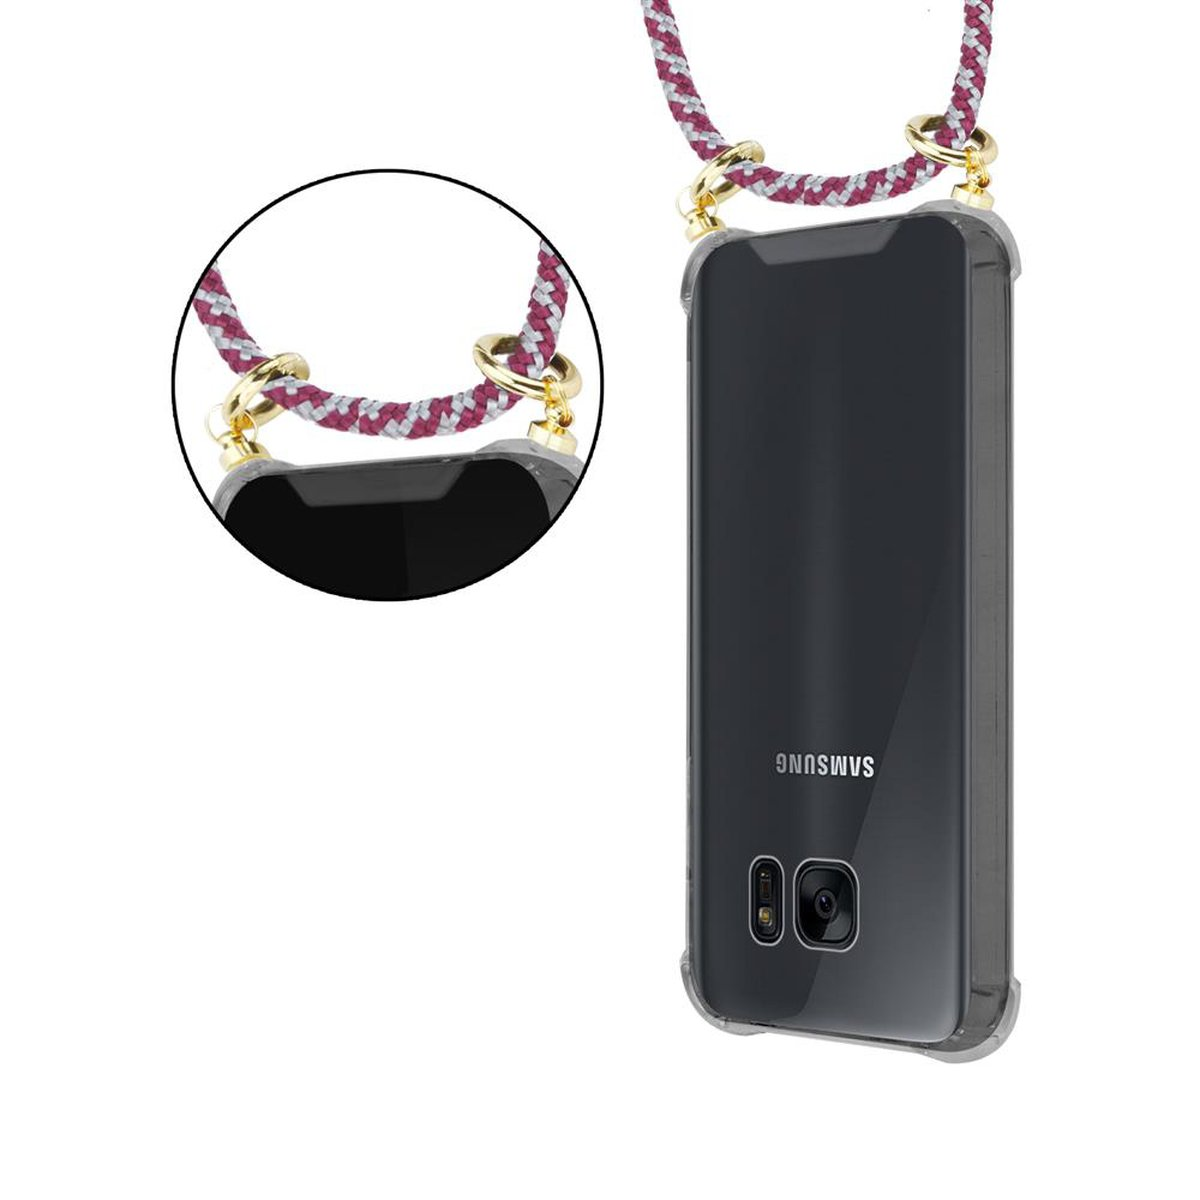 CADORABO Handy Samsung, ROT S7 EDGE, Gold Galaxy Ringen, WEIß Hülle, abnehmbarer Kette Kordel mit Band Backcover, und